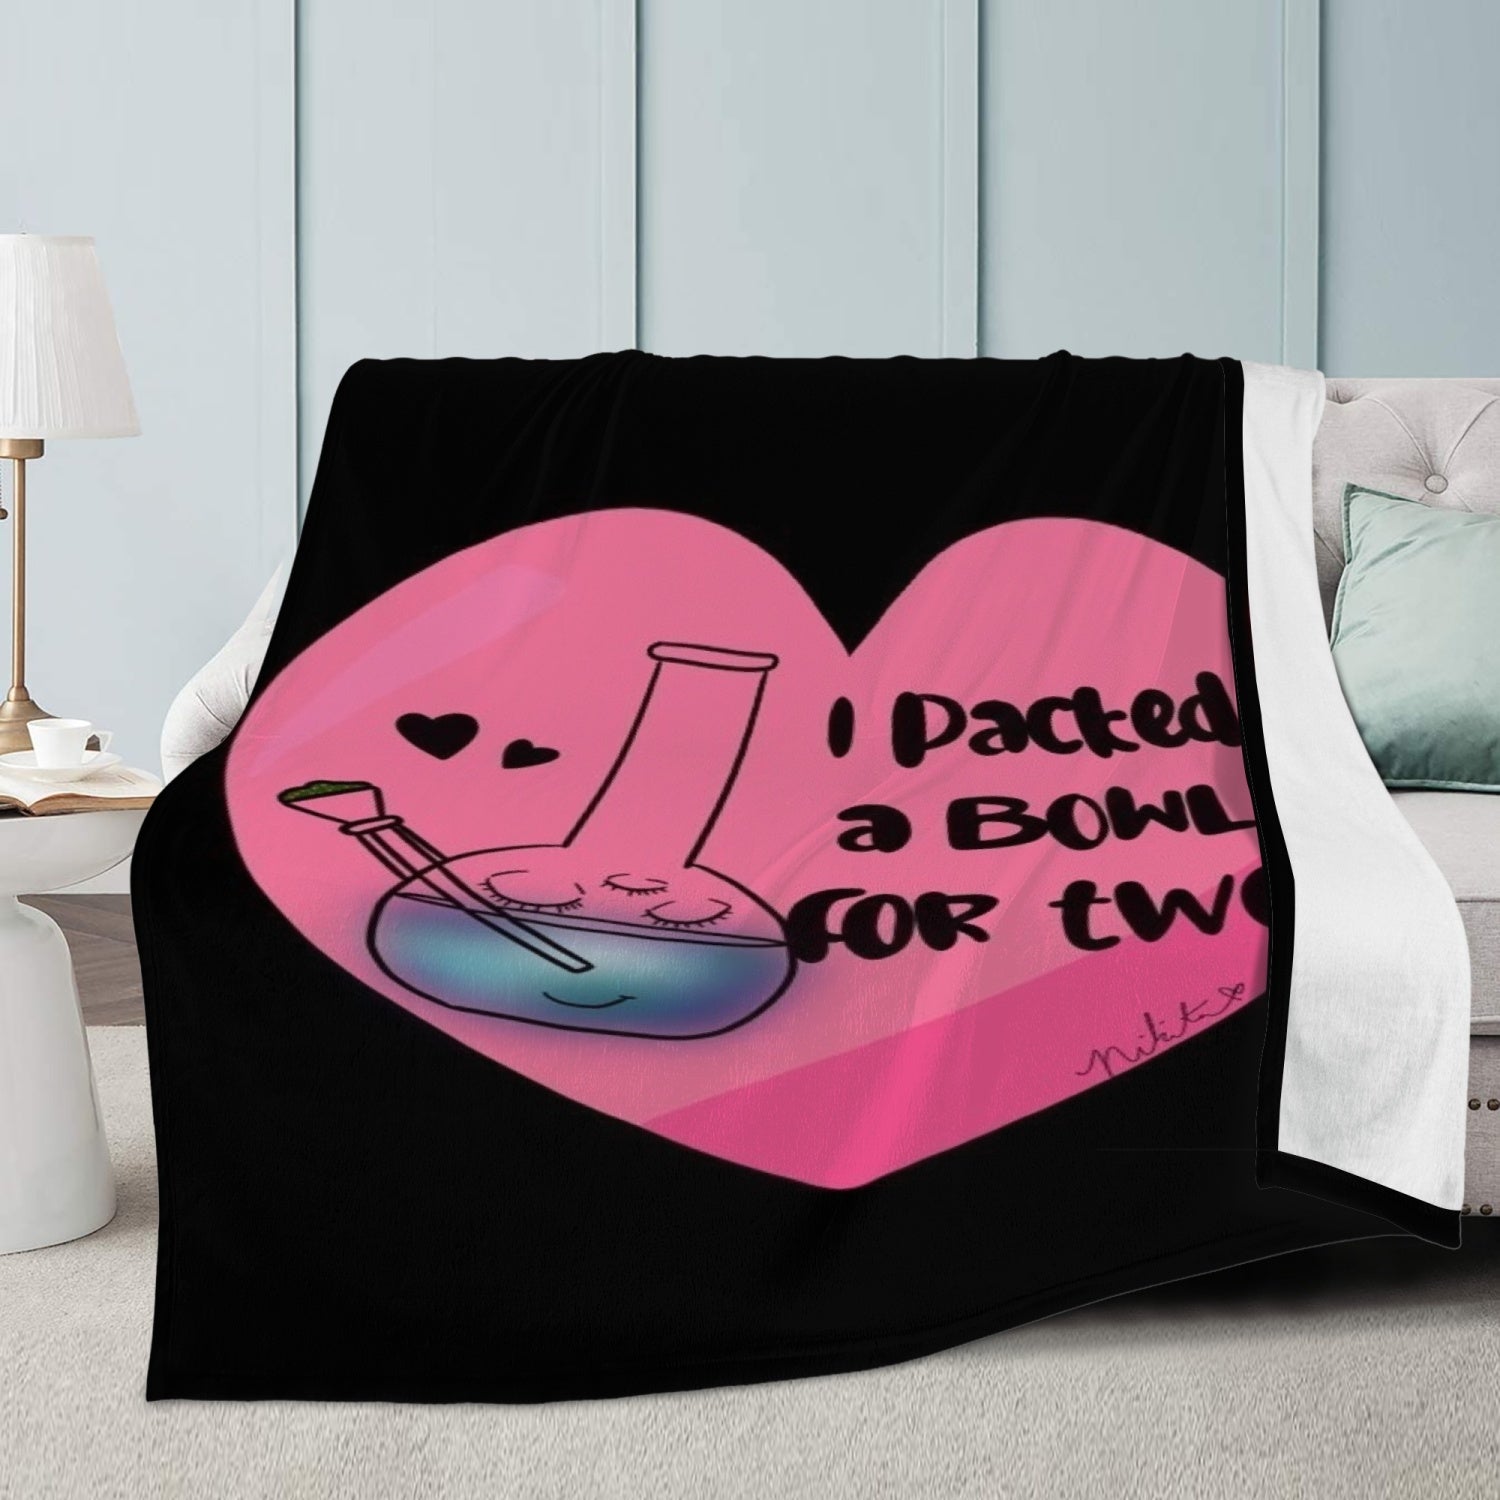 “Bowl for Two” Dual-sided Stitched Fleece Blanket